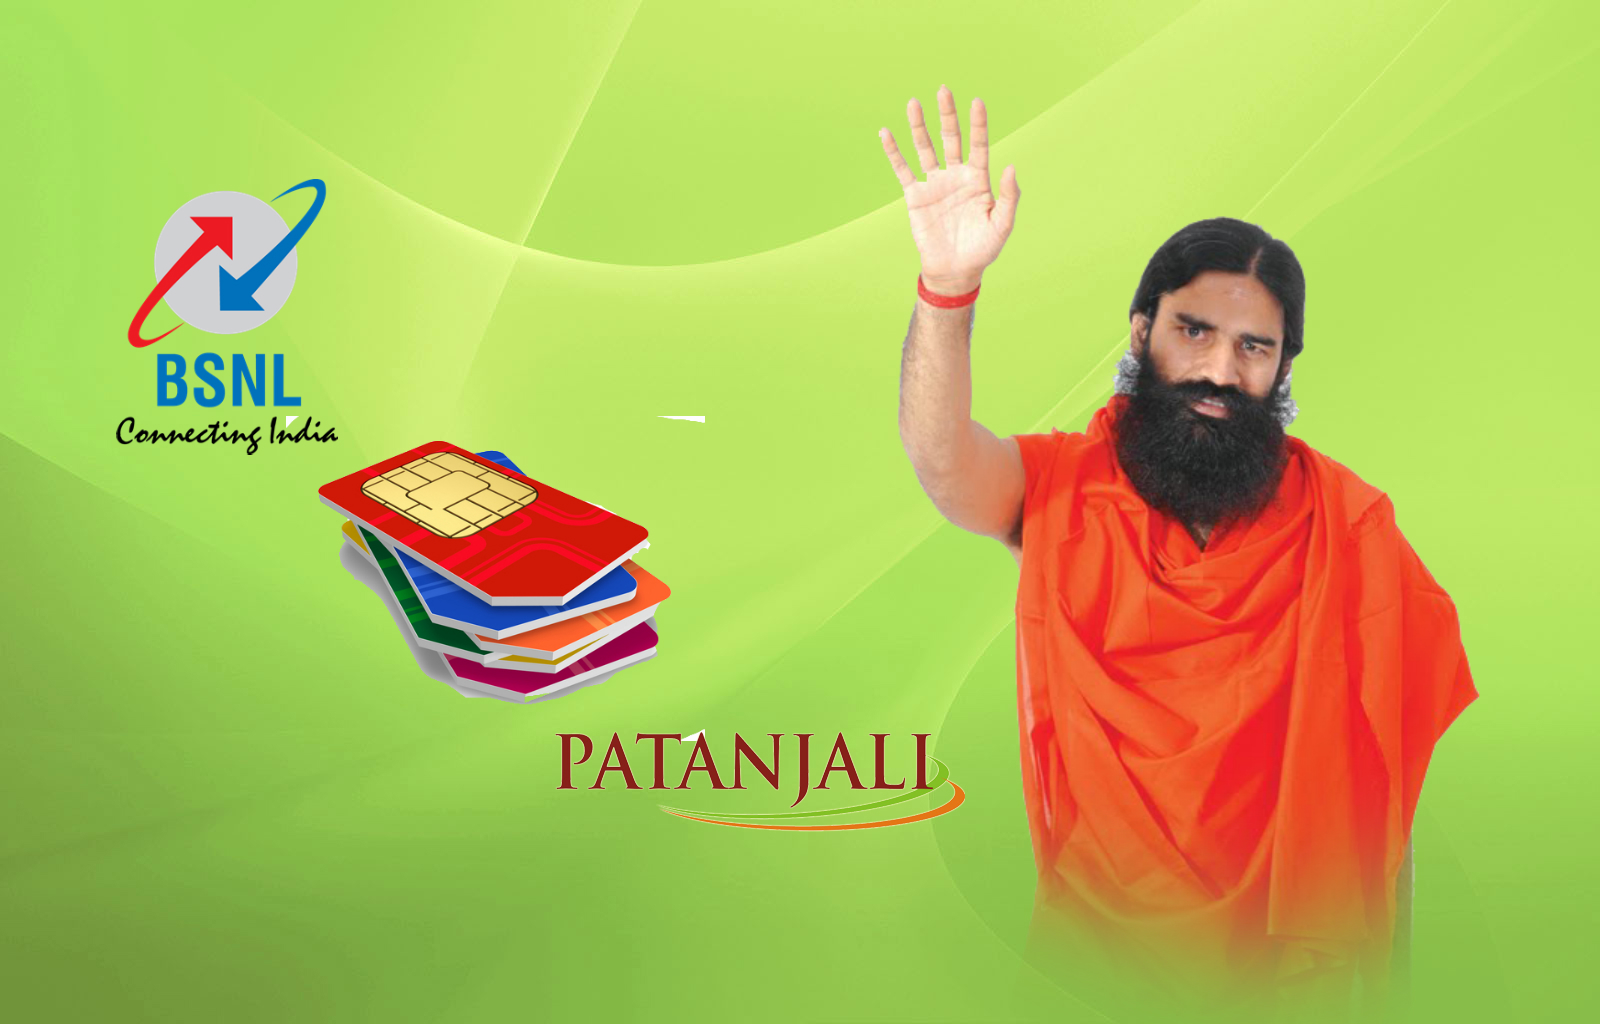 Patanjali ties up with BSNL to Launch SIM Cards